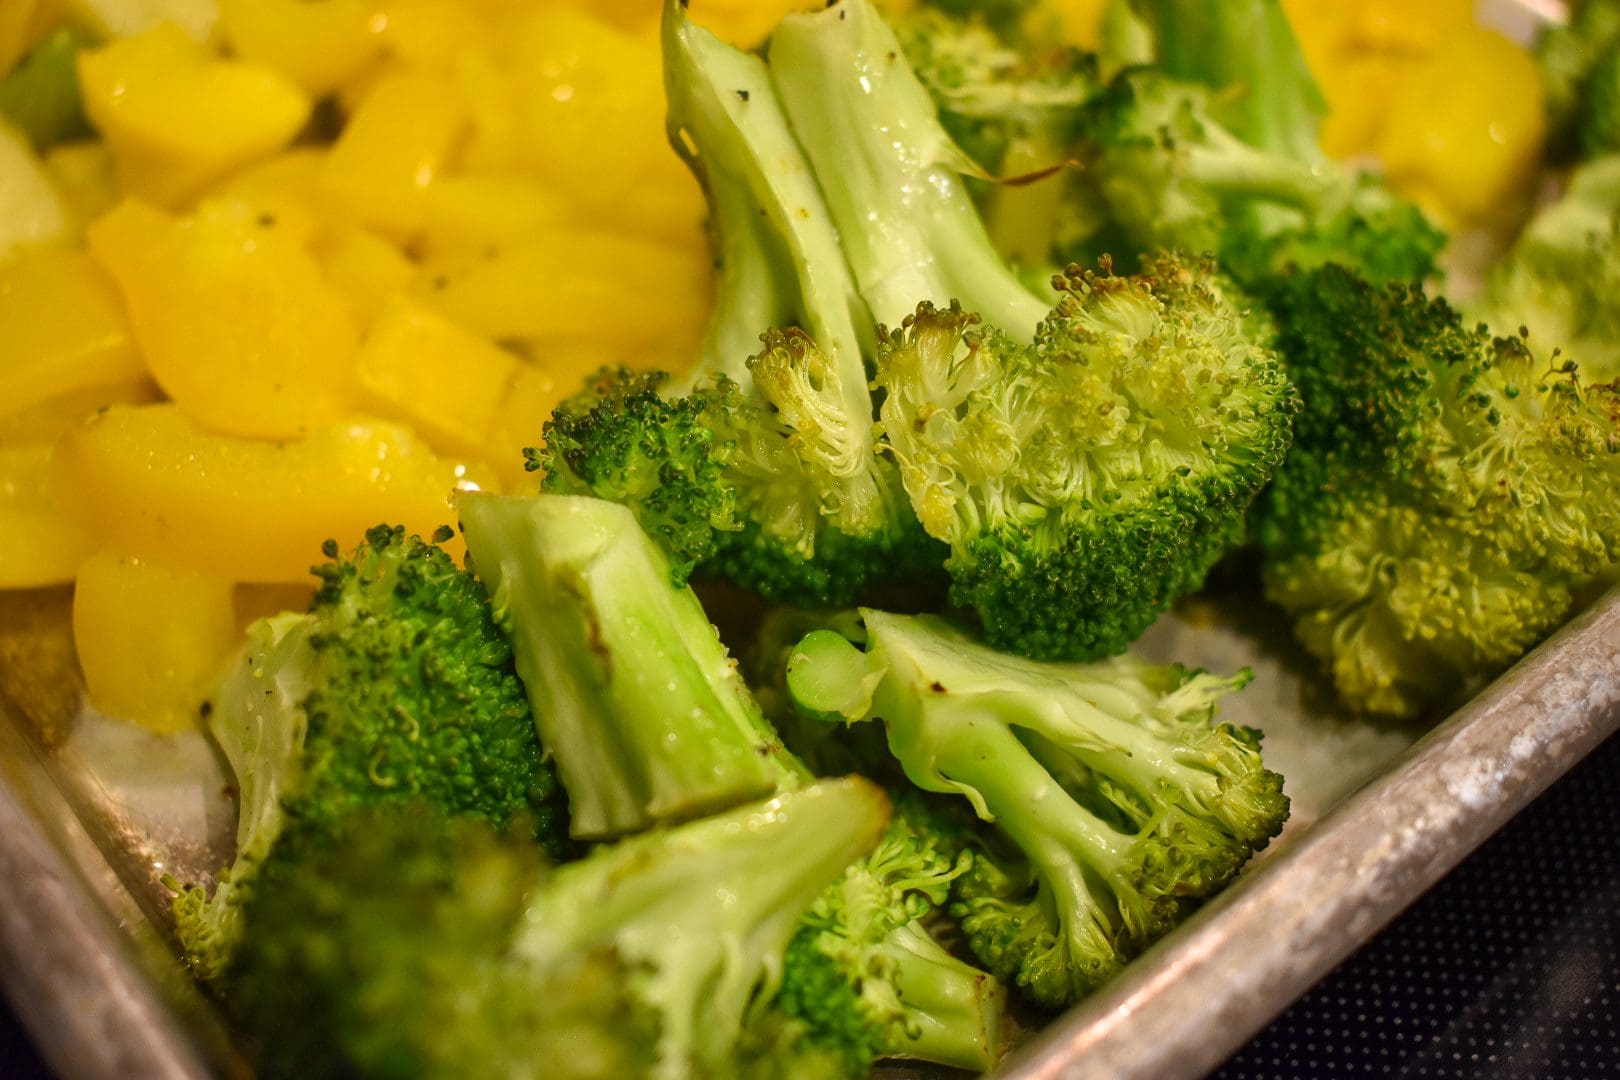 Roasted broccoli and yellow bell peppers for weekly meal prep